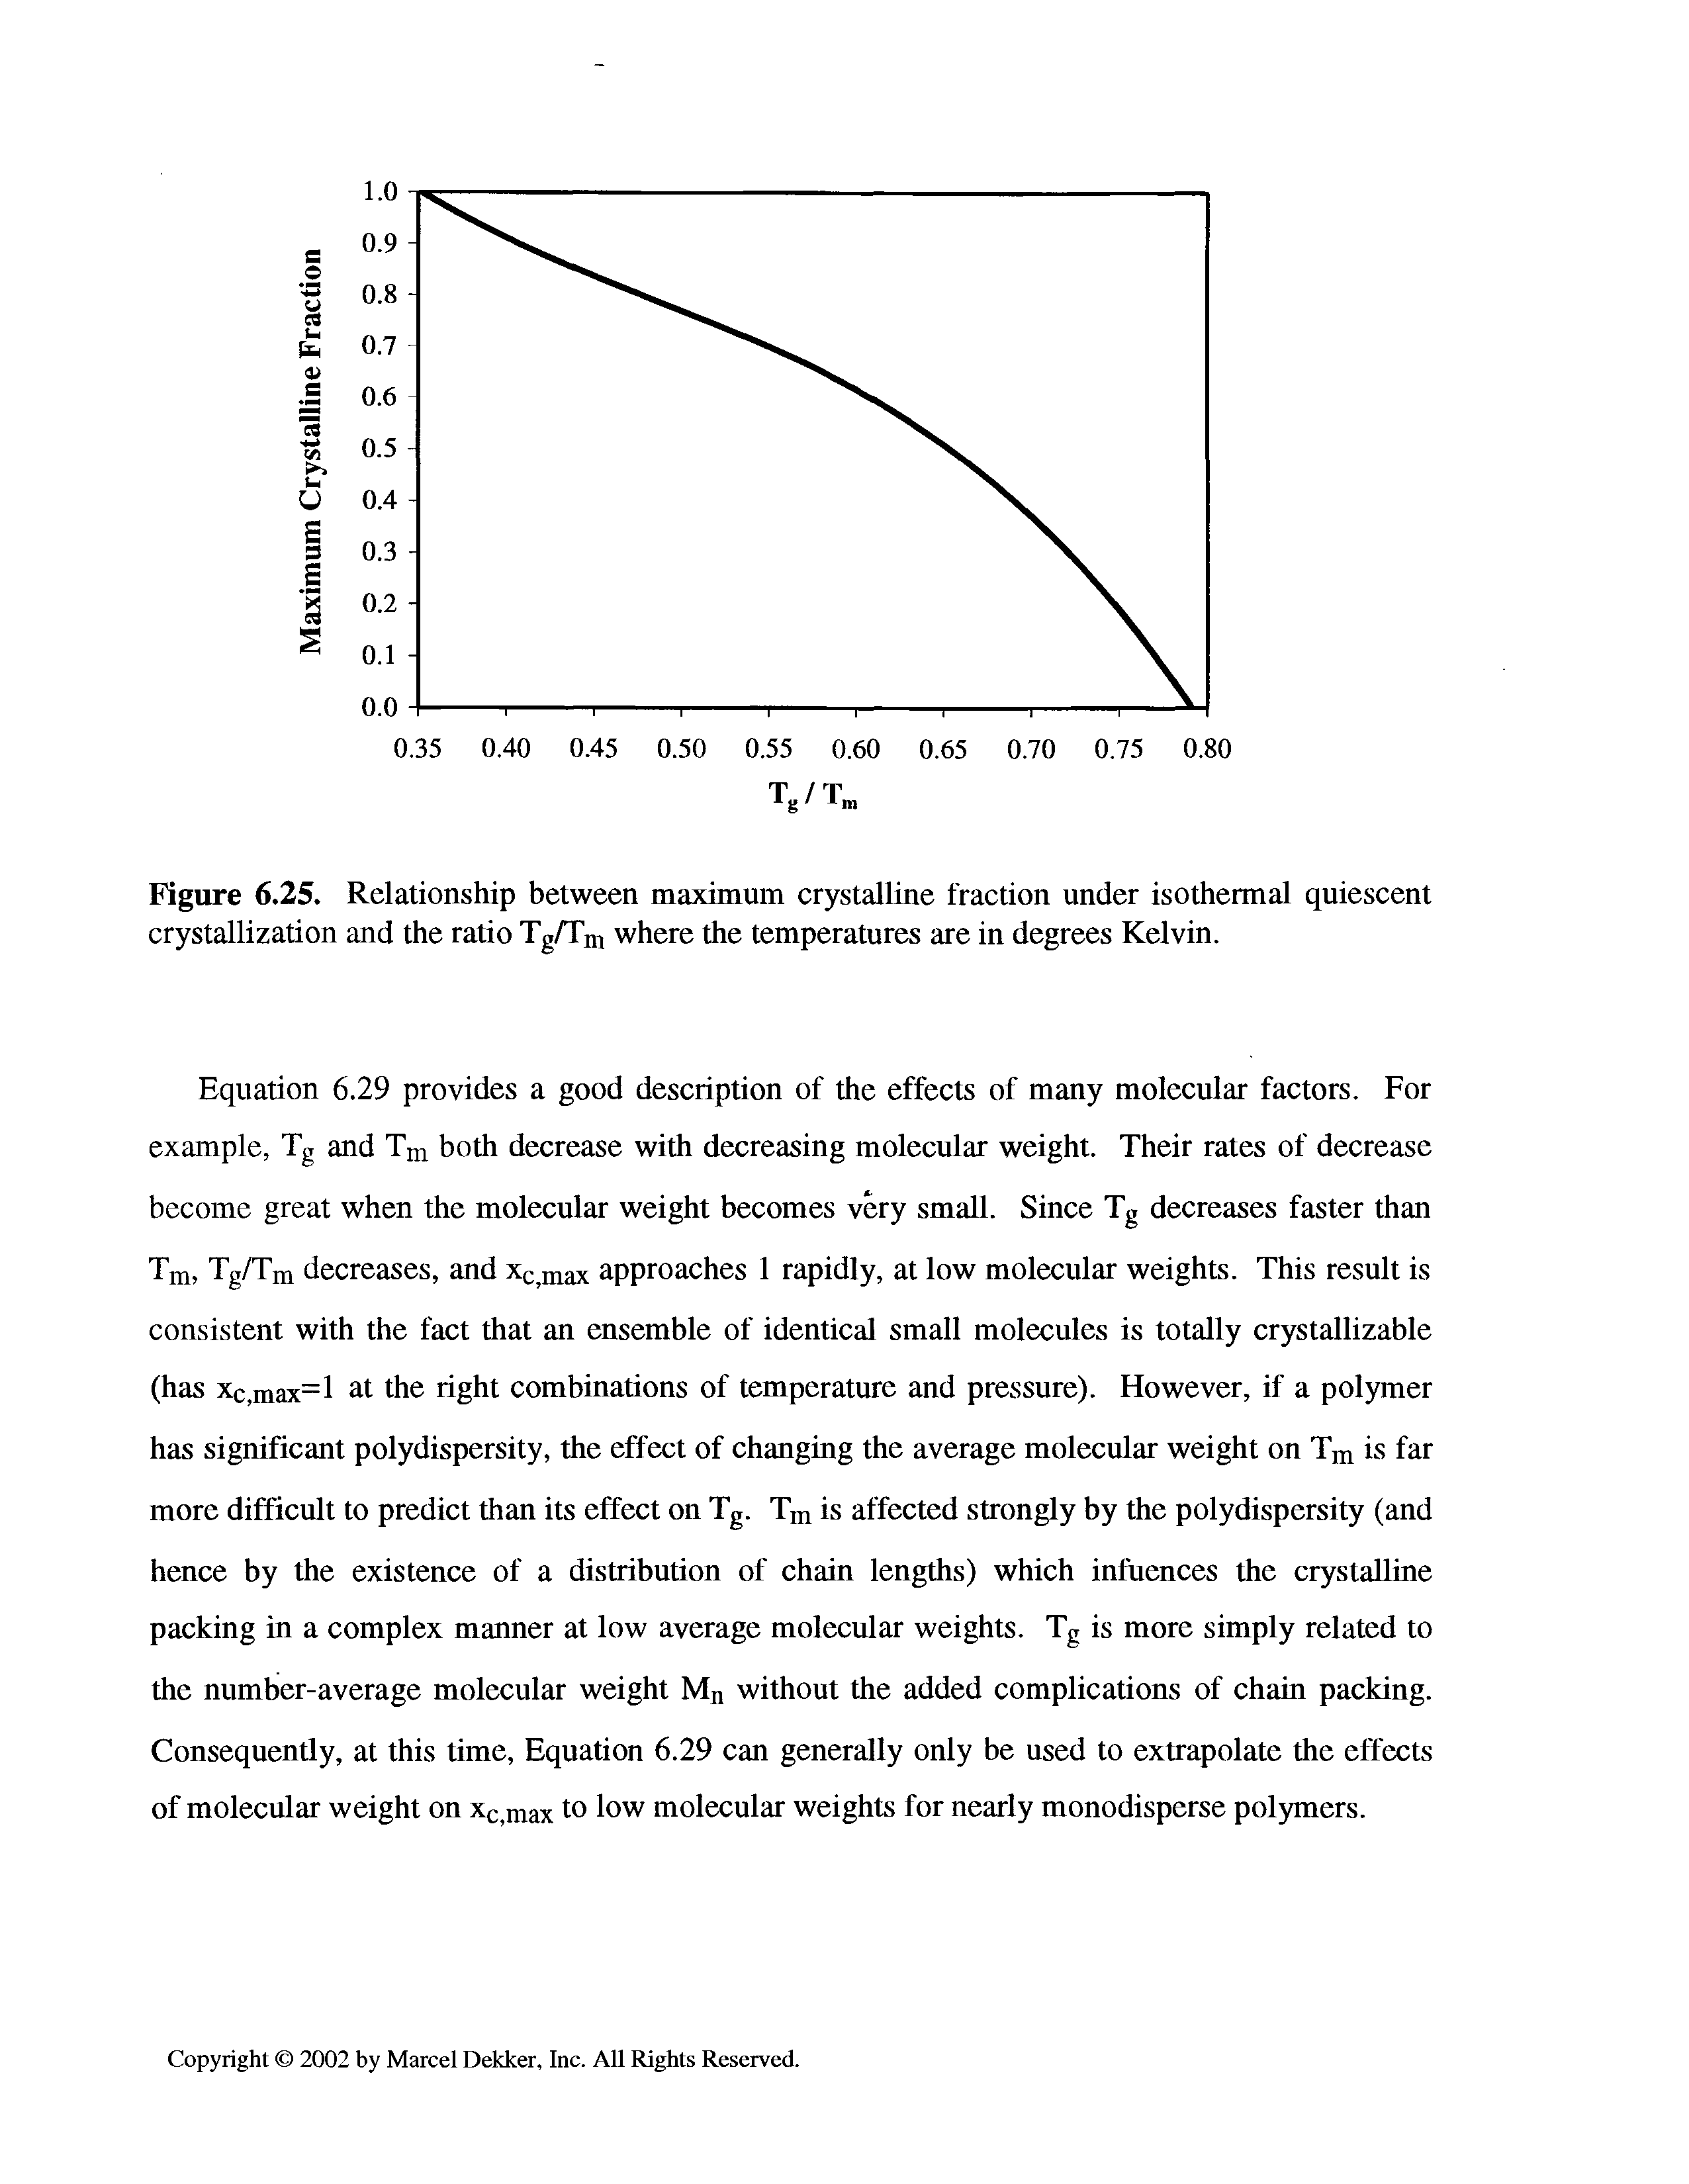 Figure 6.25. Relationship between maximum crystalline fraction under isothermal quiescent crystallization and the ratio Tg/Tm where the temperatures are in degrees Kelvin.